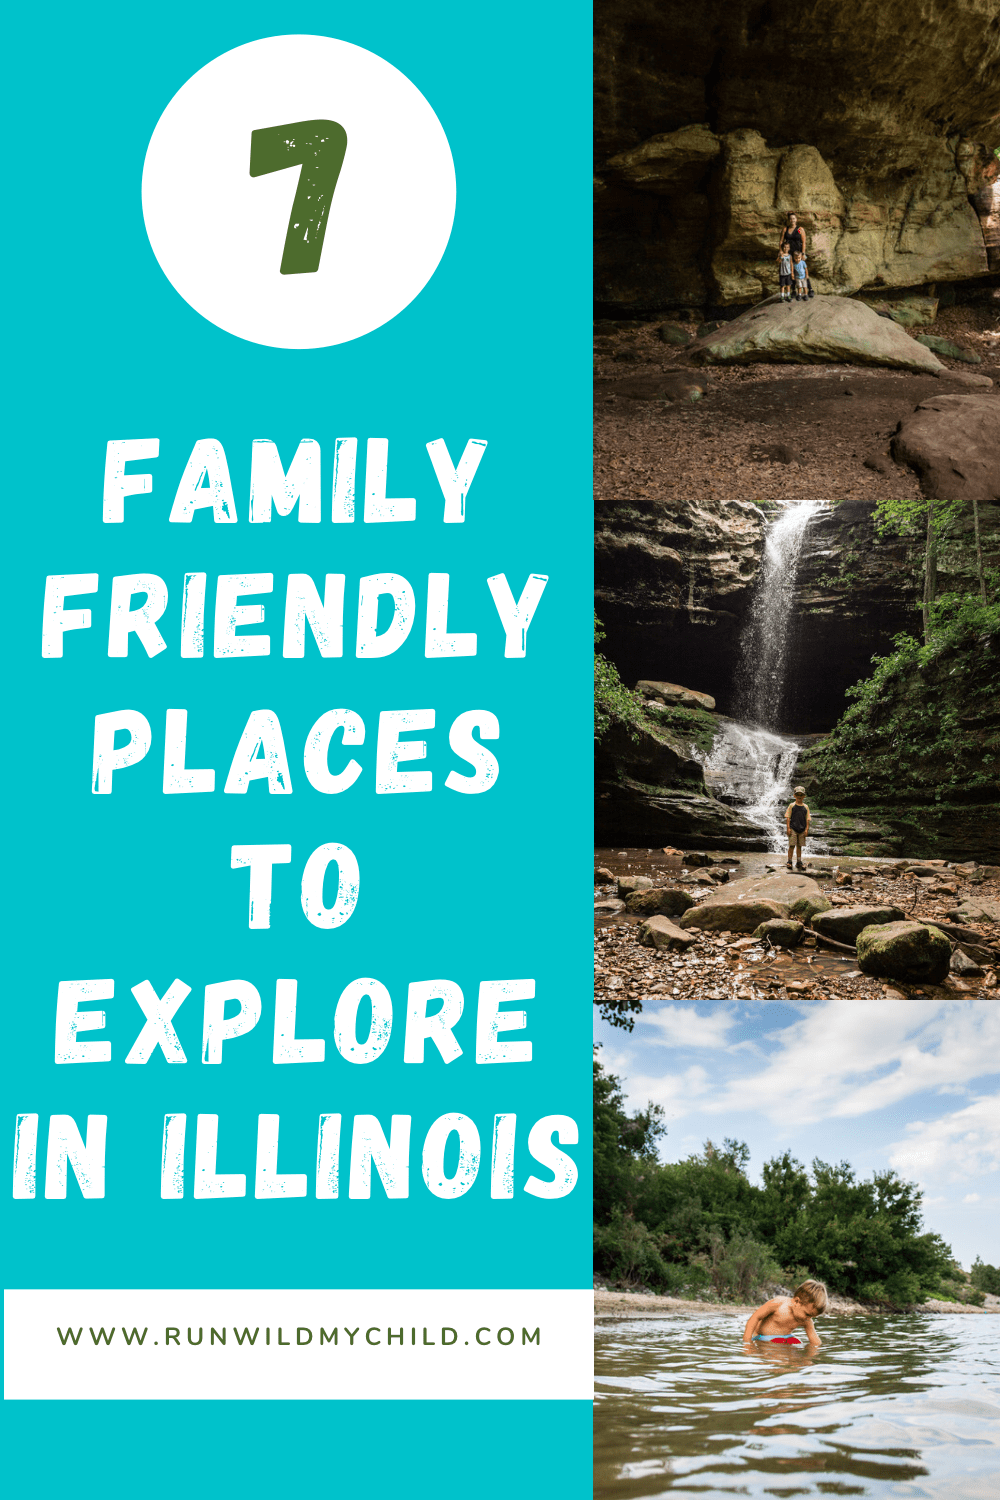 Family-friendly outdoor places to explore in Illinois